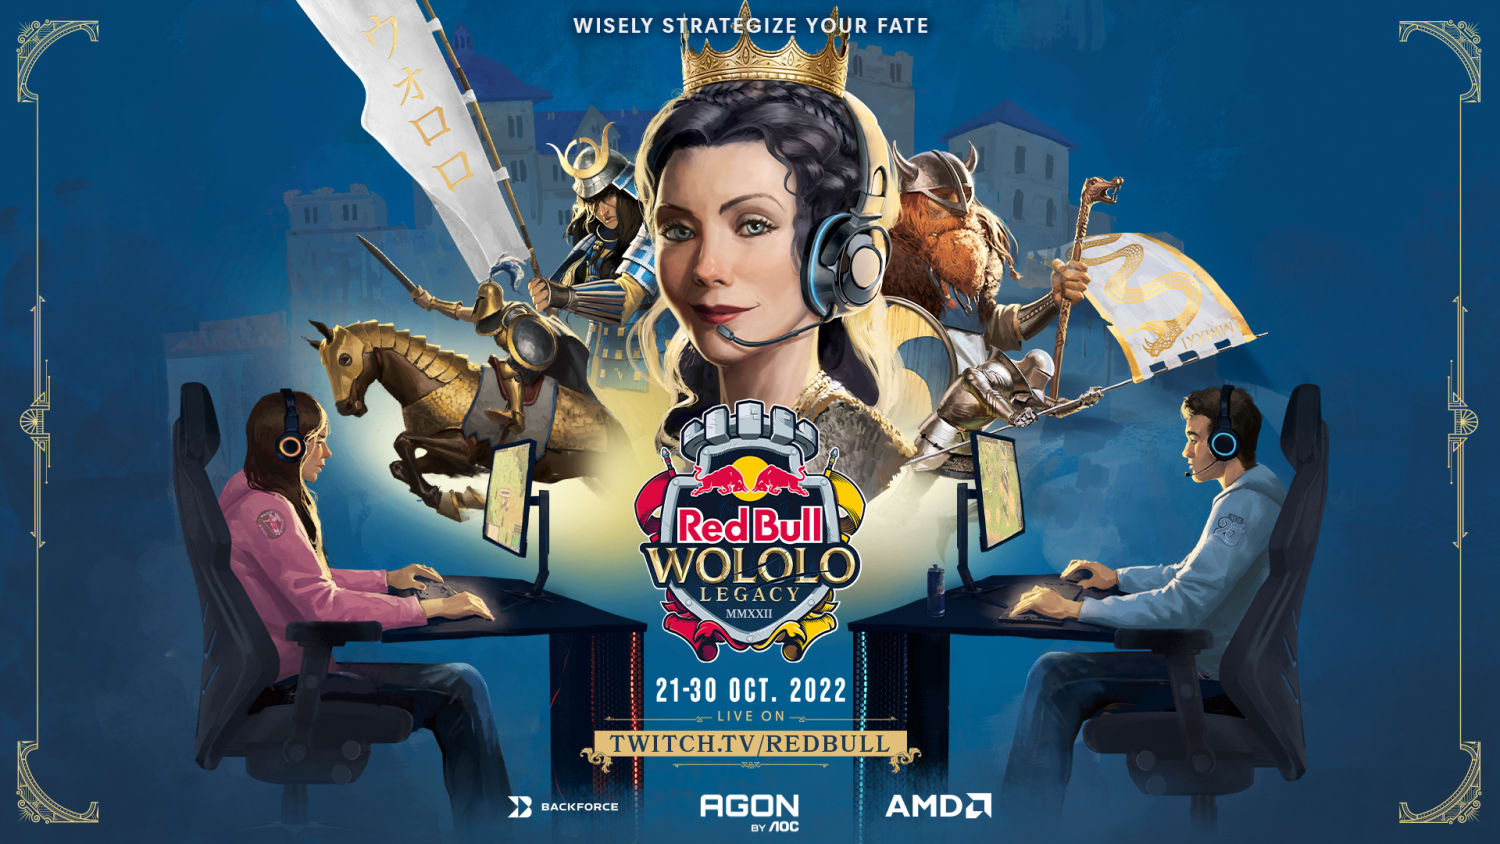 Red Bull Red Bull Wololo: Legacy: event info and videos